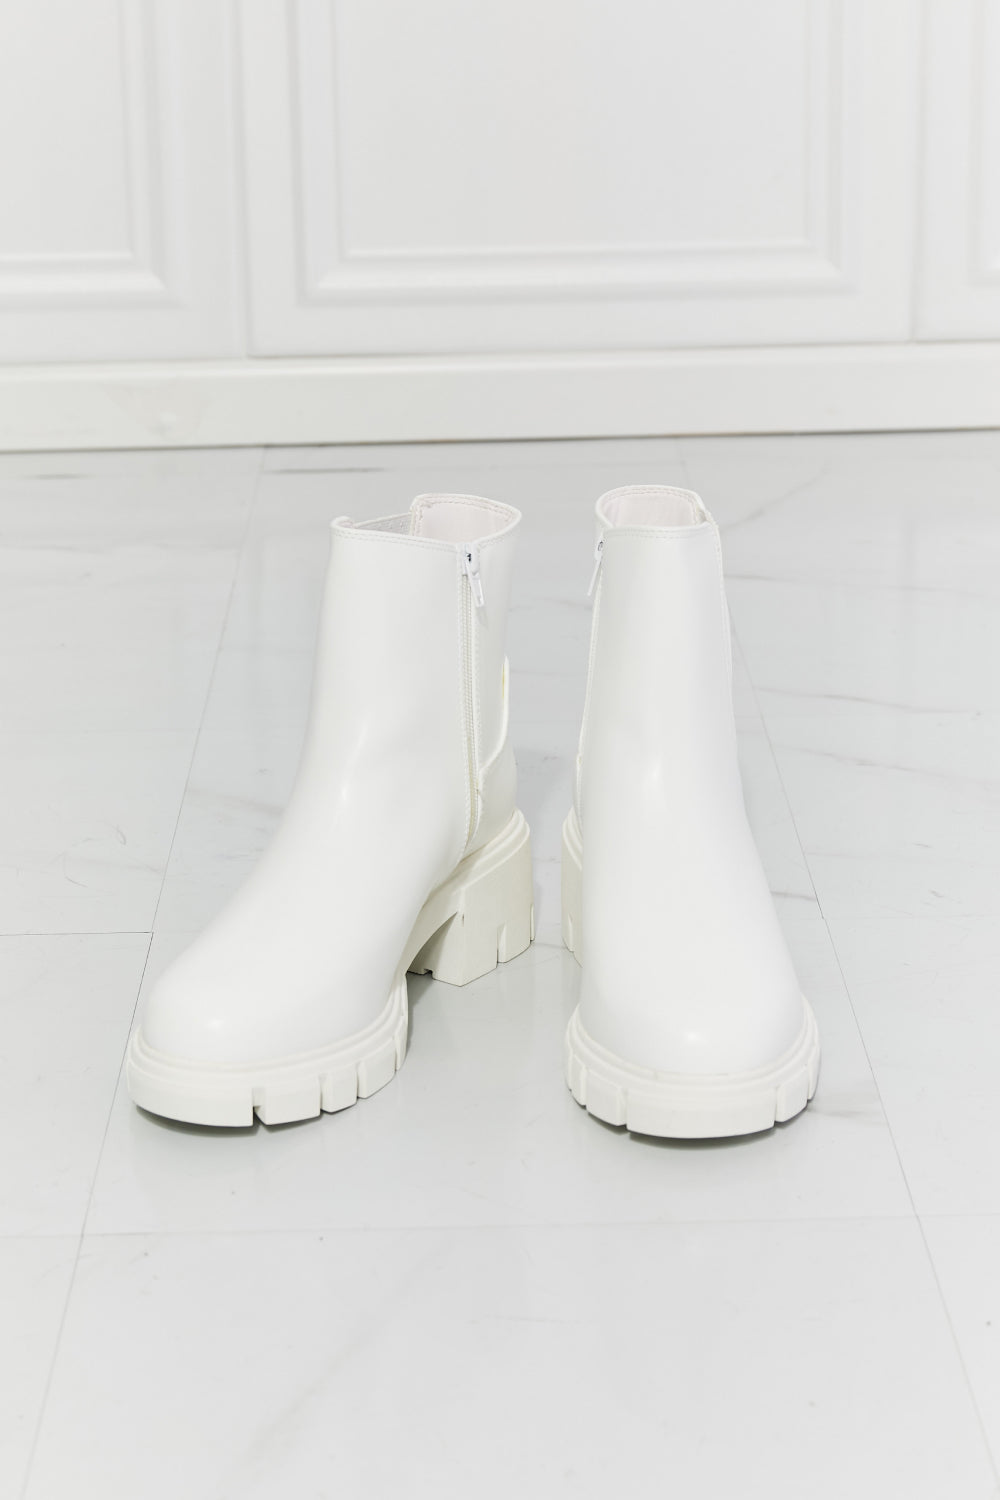 What It Takes Lug Sole Chelsea Boots in White - Copper + Rose